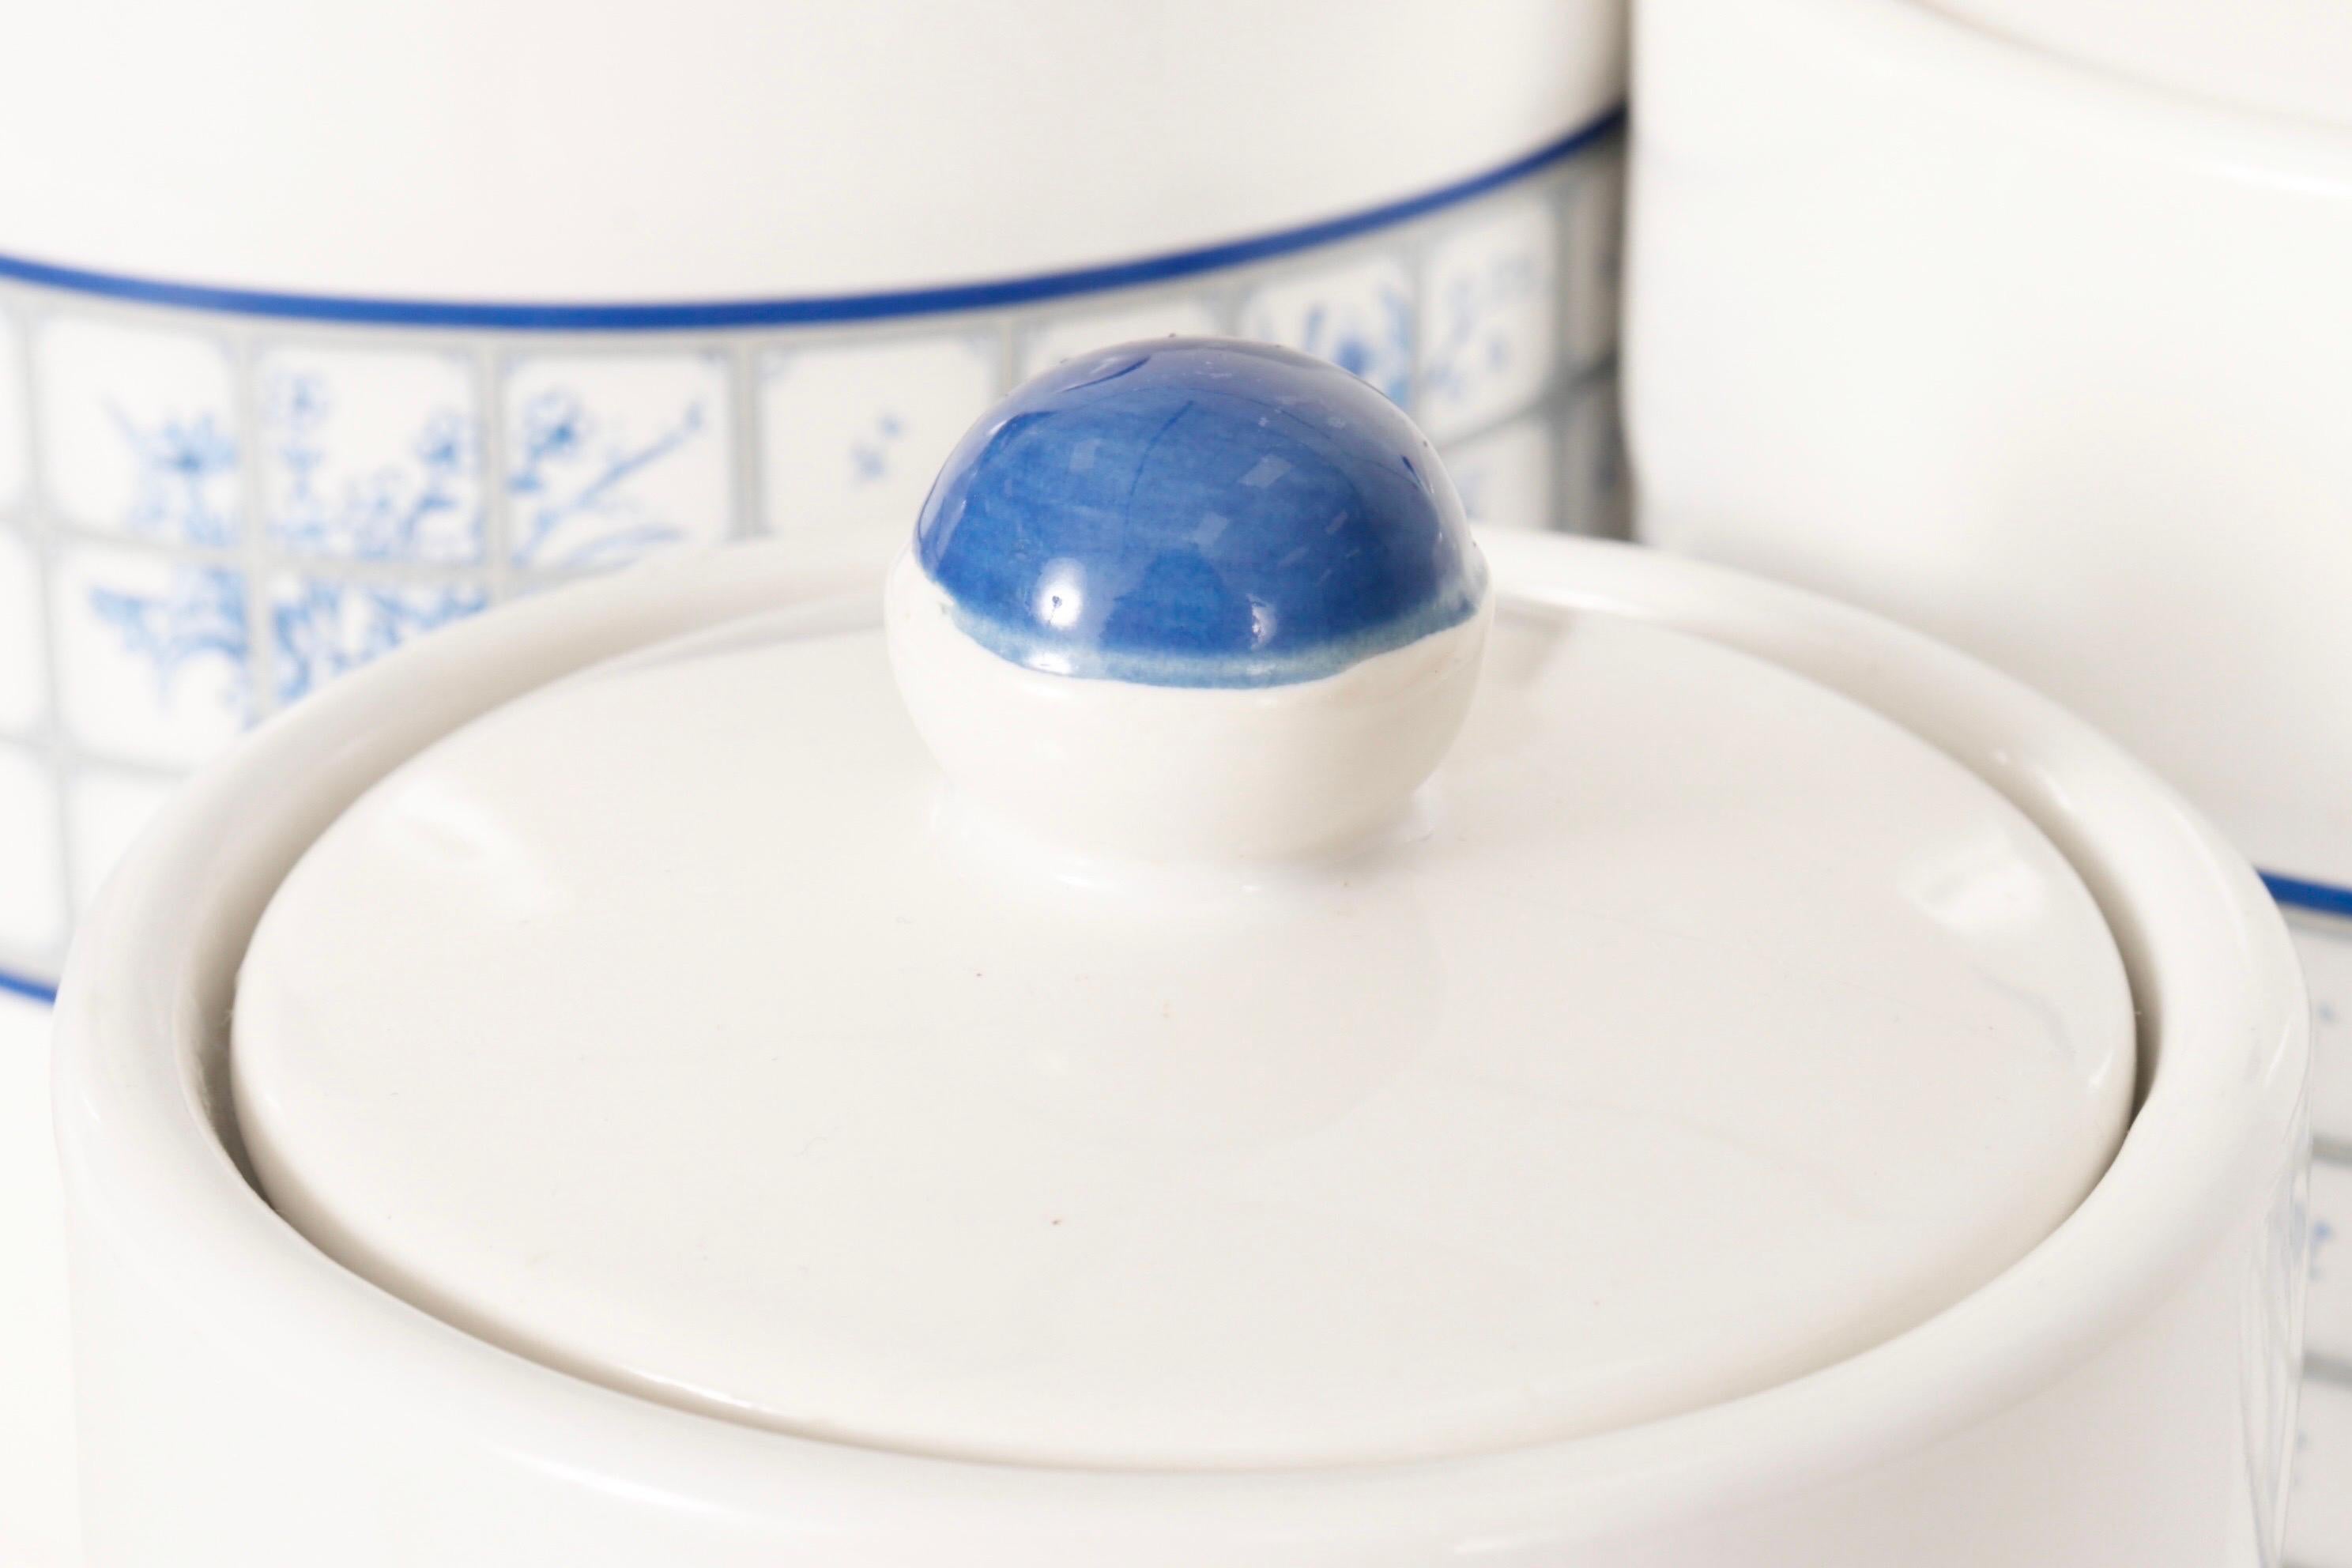 blue and white ceramic canisters